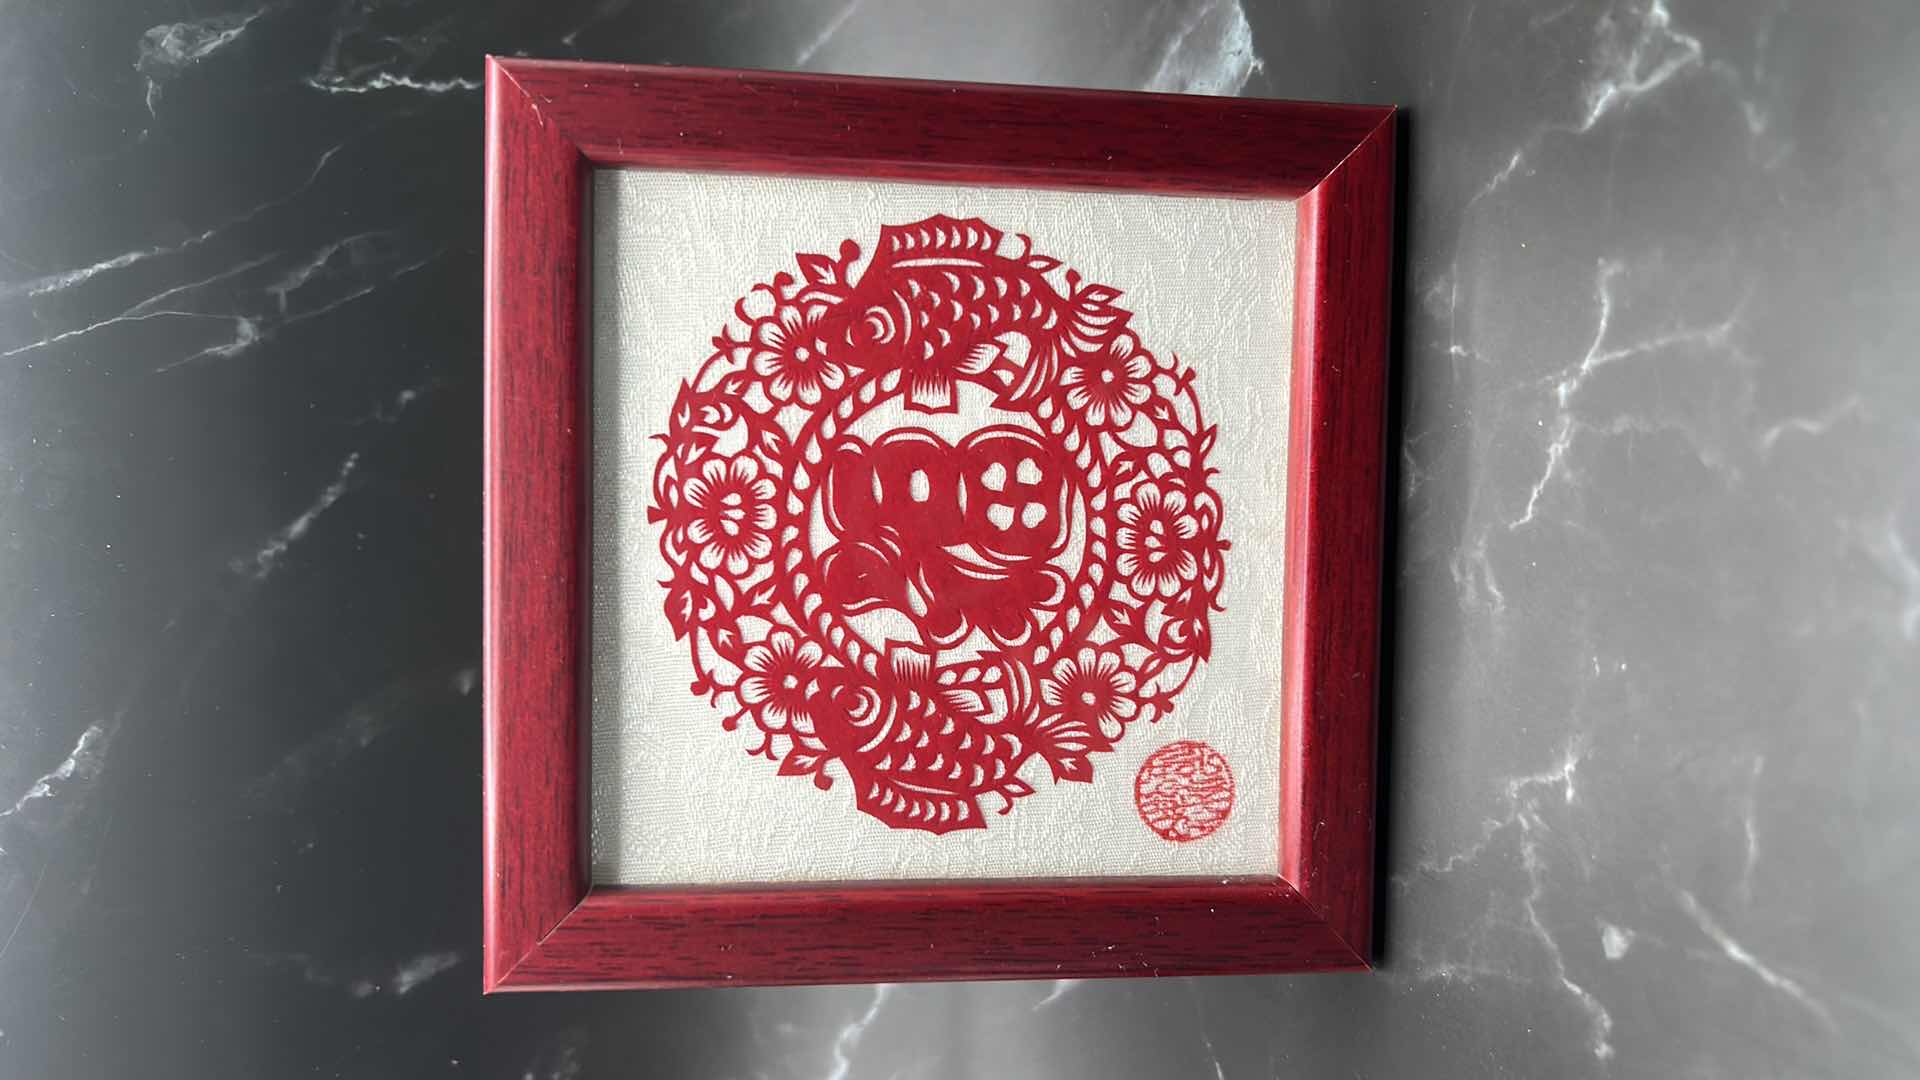 Photo 2 of 2- CHINESE COLLECTIBLES- STAMPED NUMBERED PORCELAIN PANDA BEAR. FRAMED SILK FABRIC W SILK THREADS (panda bear is 3 1/2” x 2”)